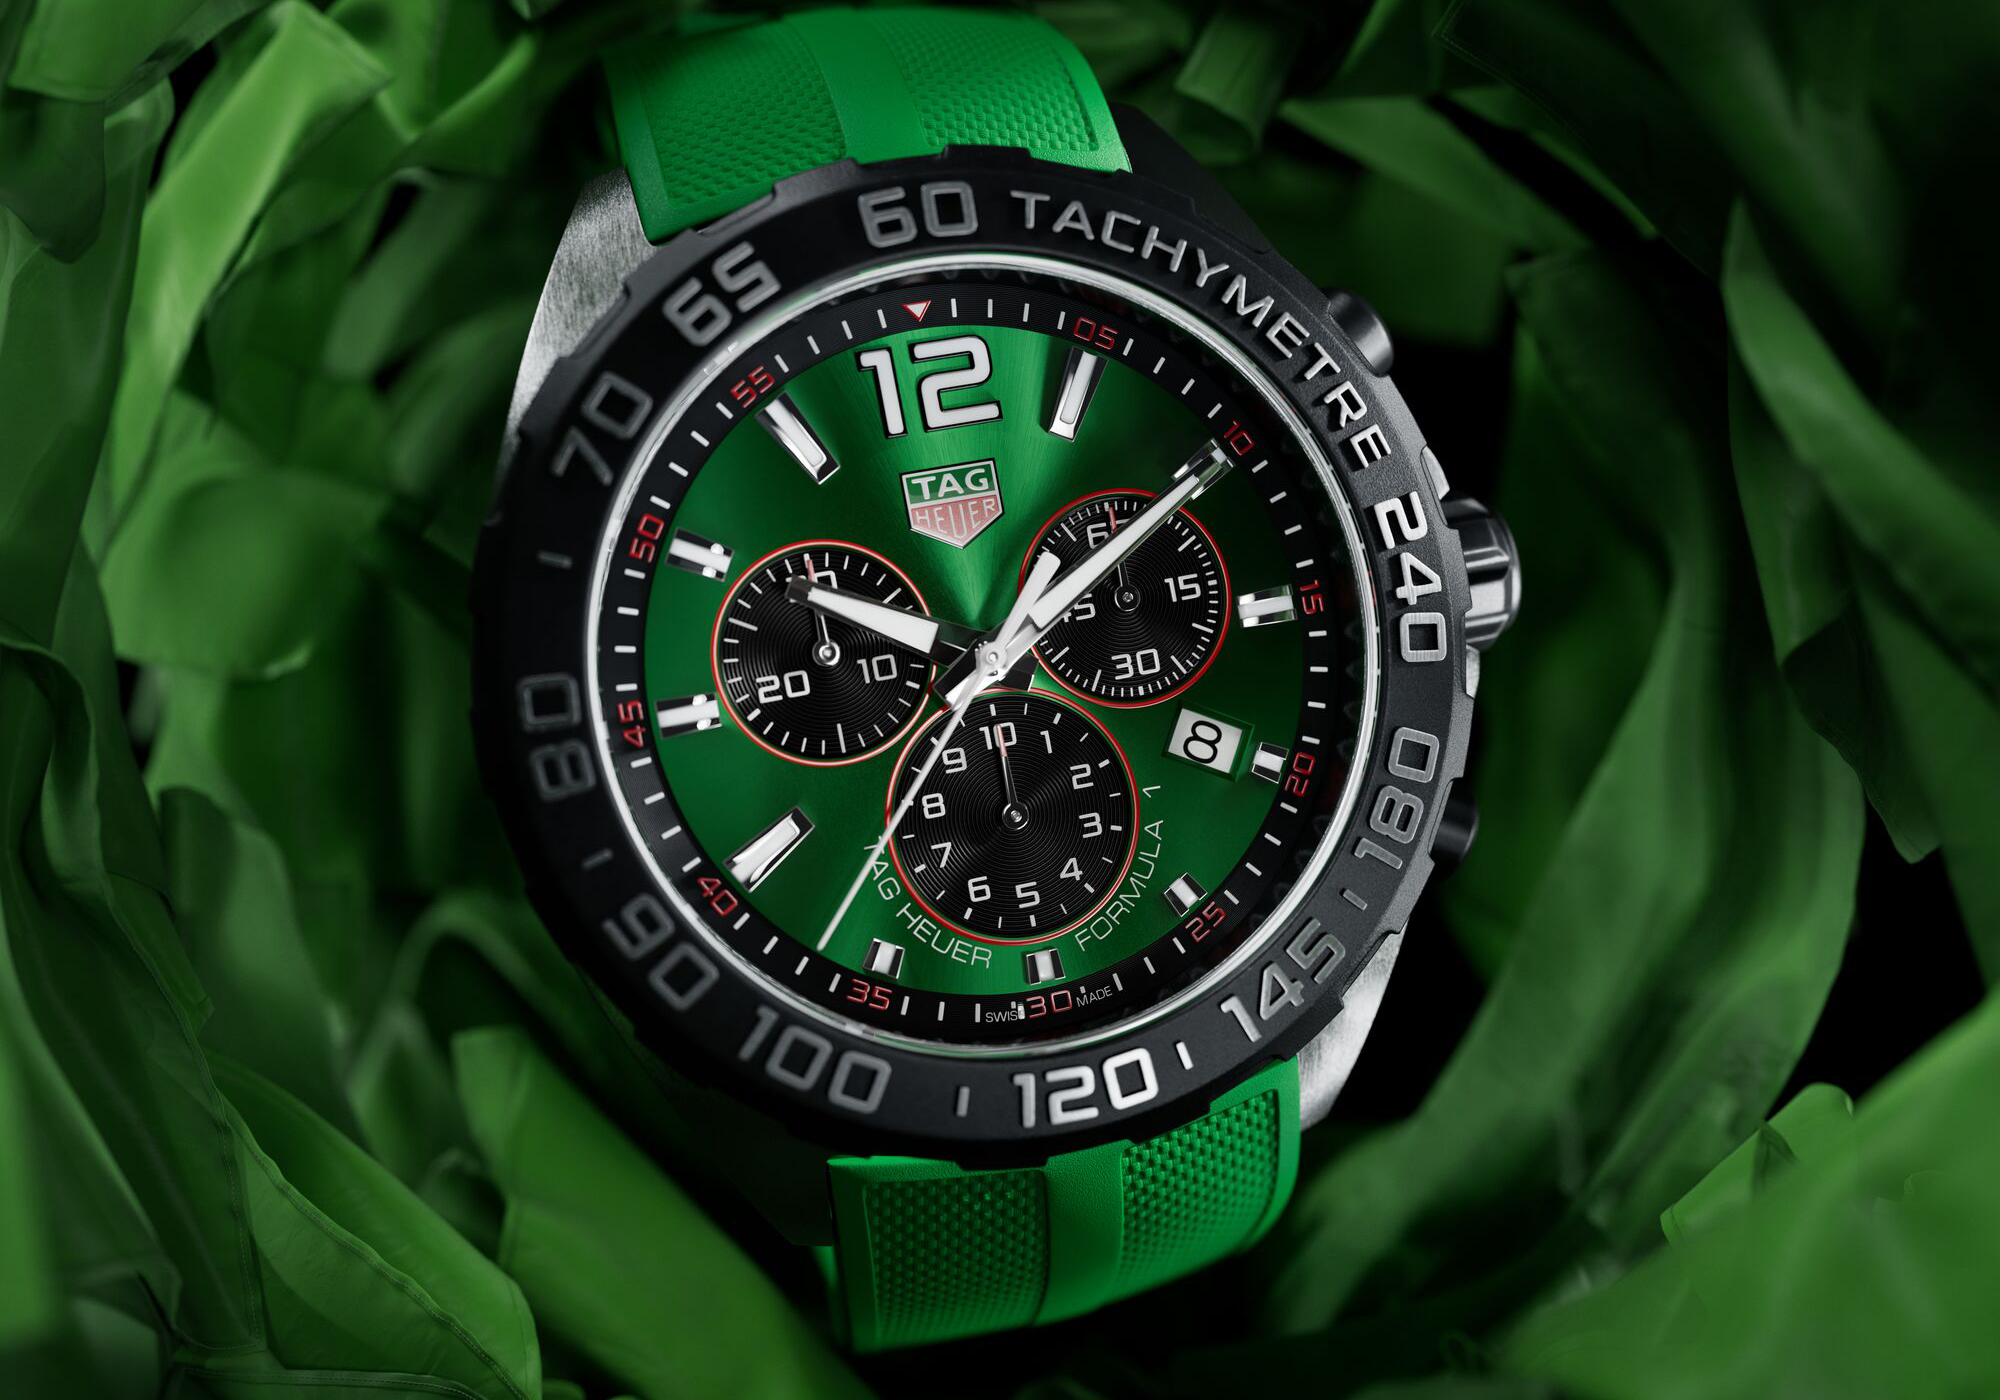 Three Stylish New Chronographs In Bright Racing Colors 